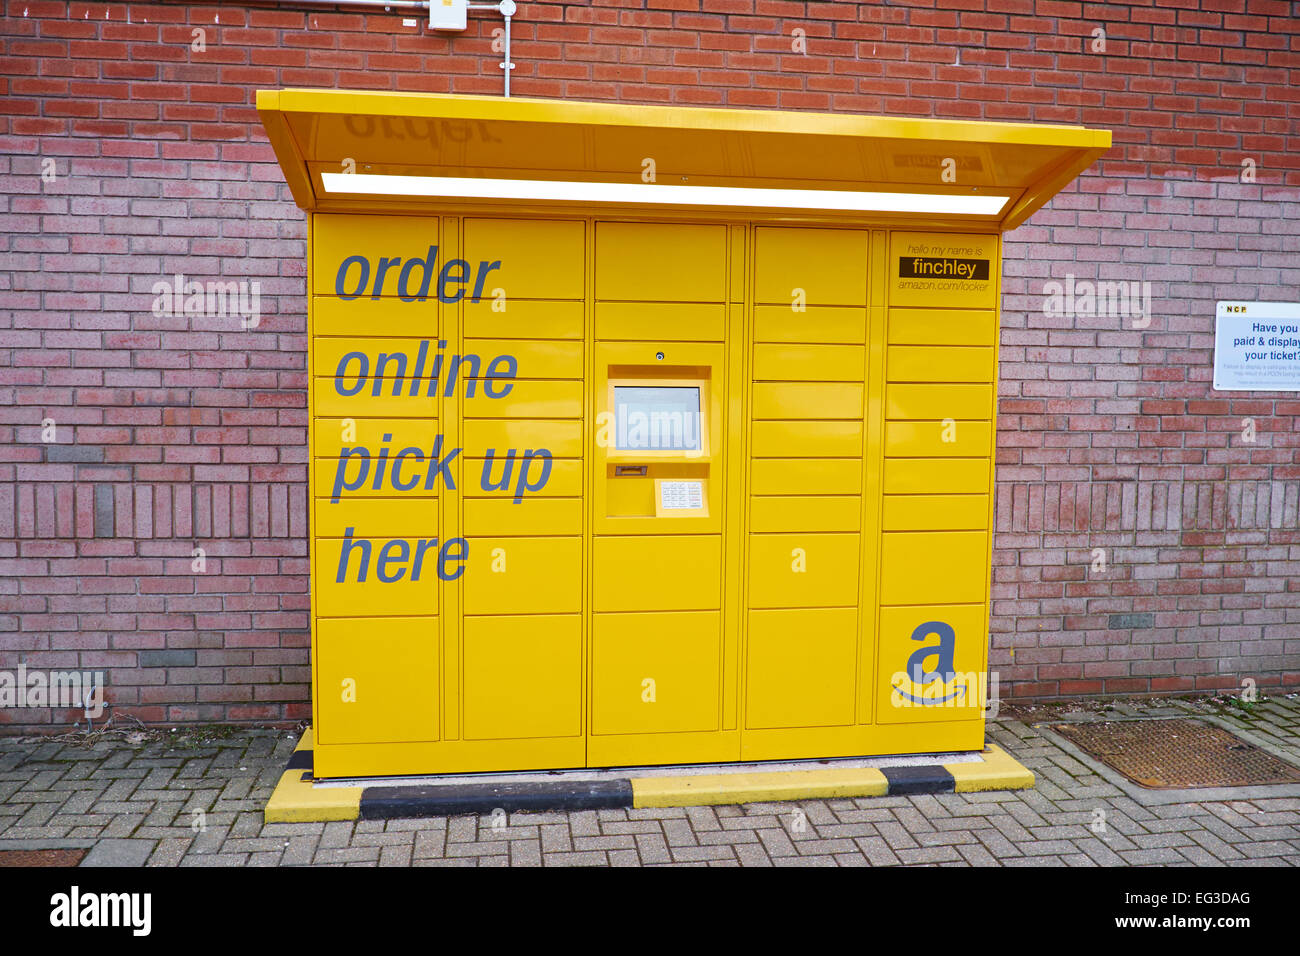 Train Station Locker High Resolution Stock Photography and Images - Alamy